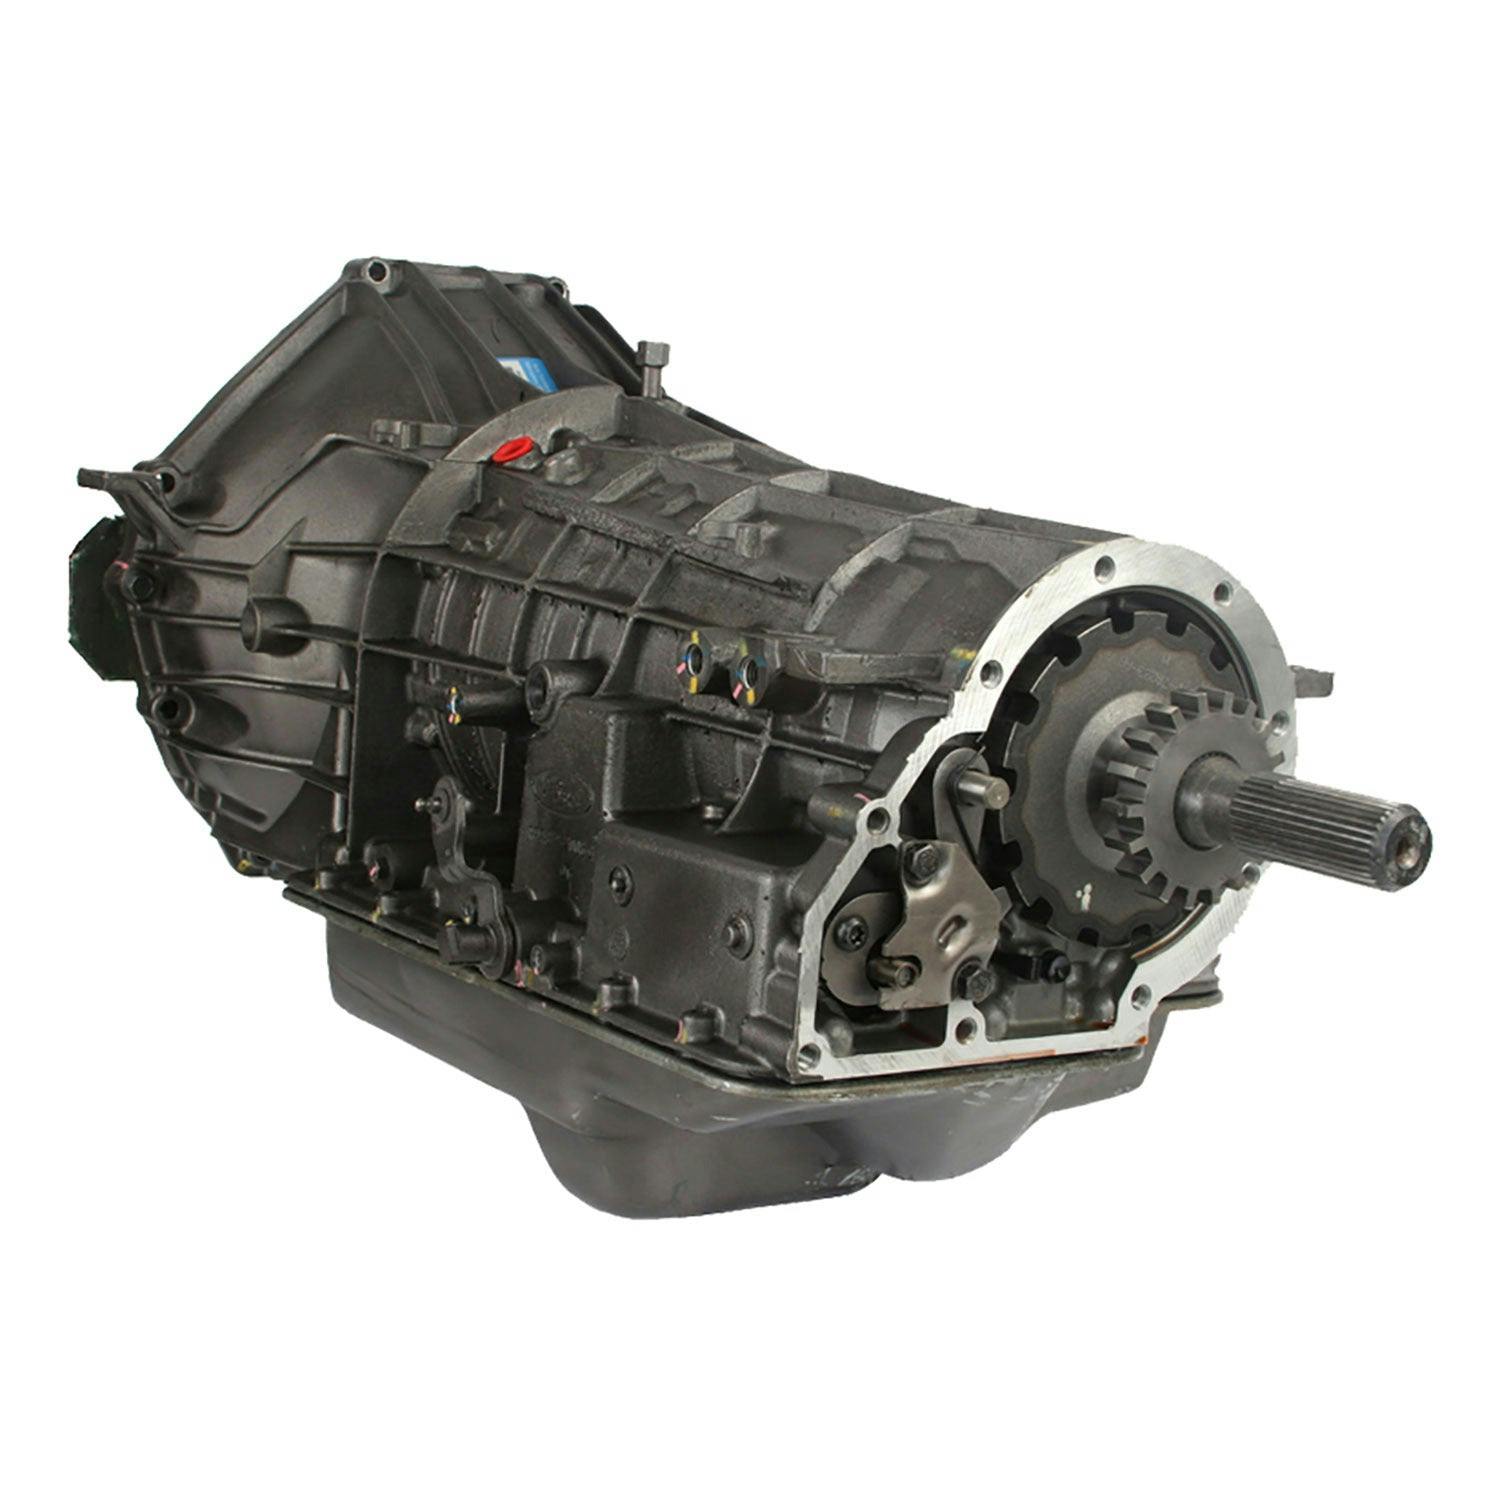 Automatic Transmission for 2000-2005 Ford Super Duty Trucks and F-53 Motorhome Chassis 4WD/RWD with 6.8L V10 Engine